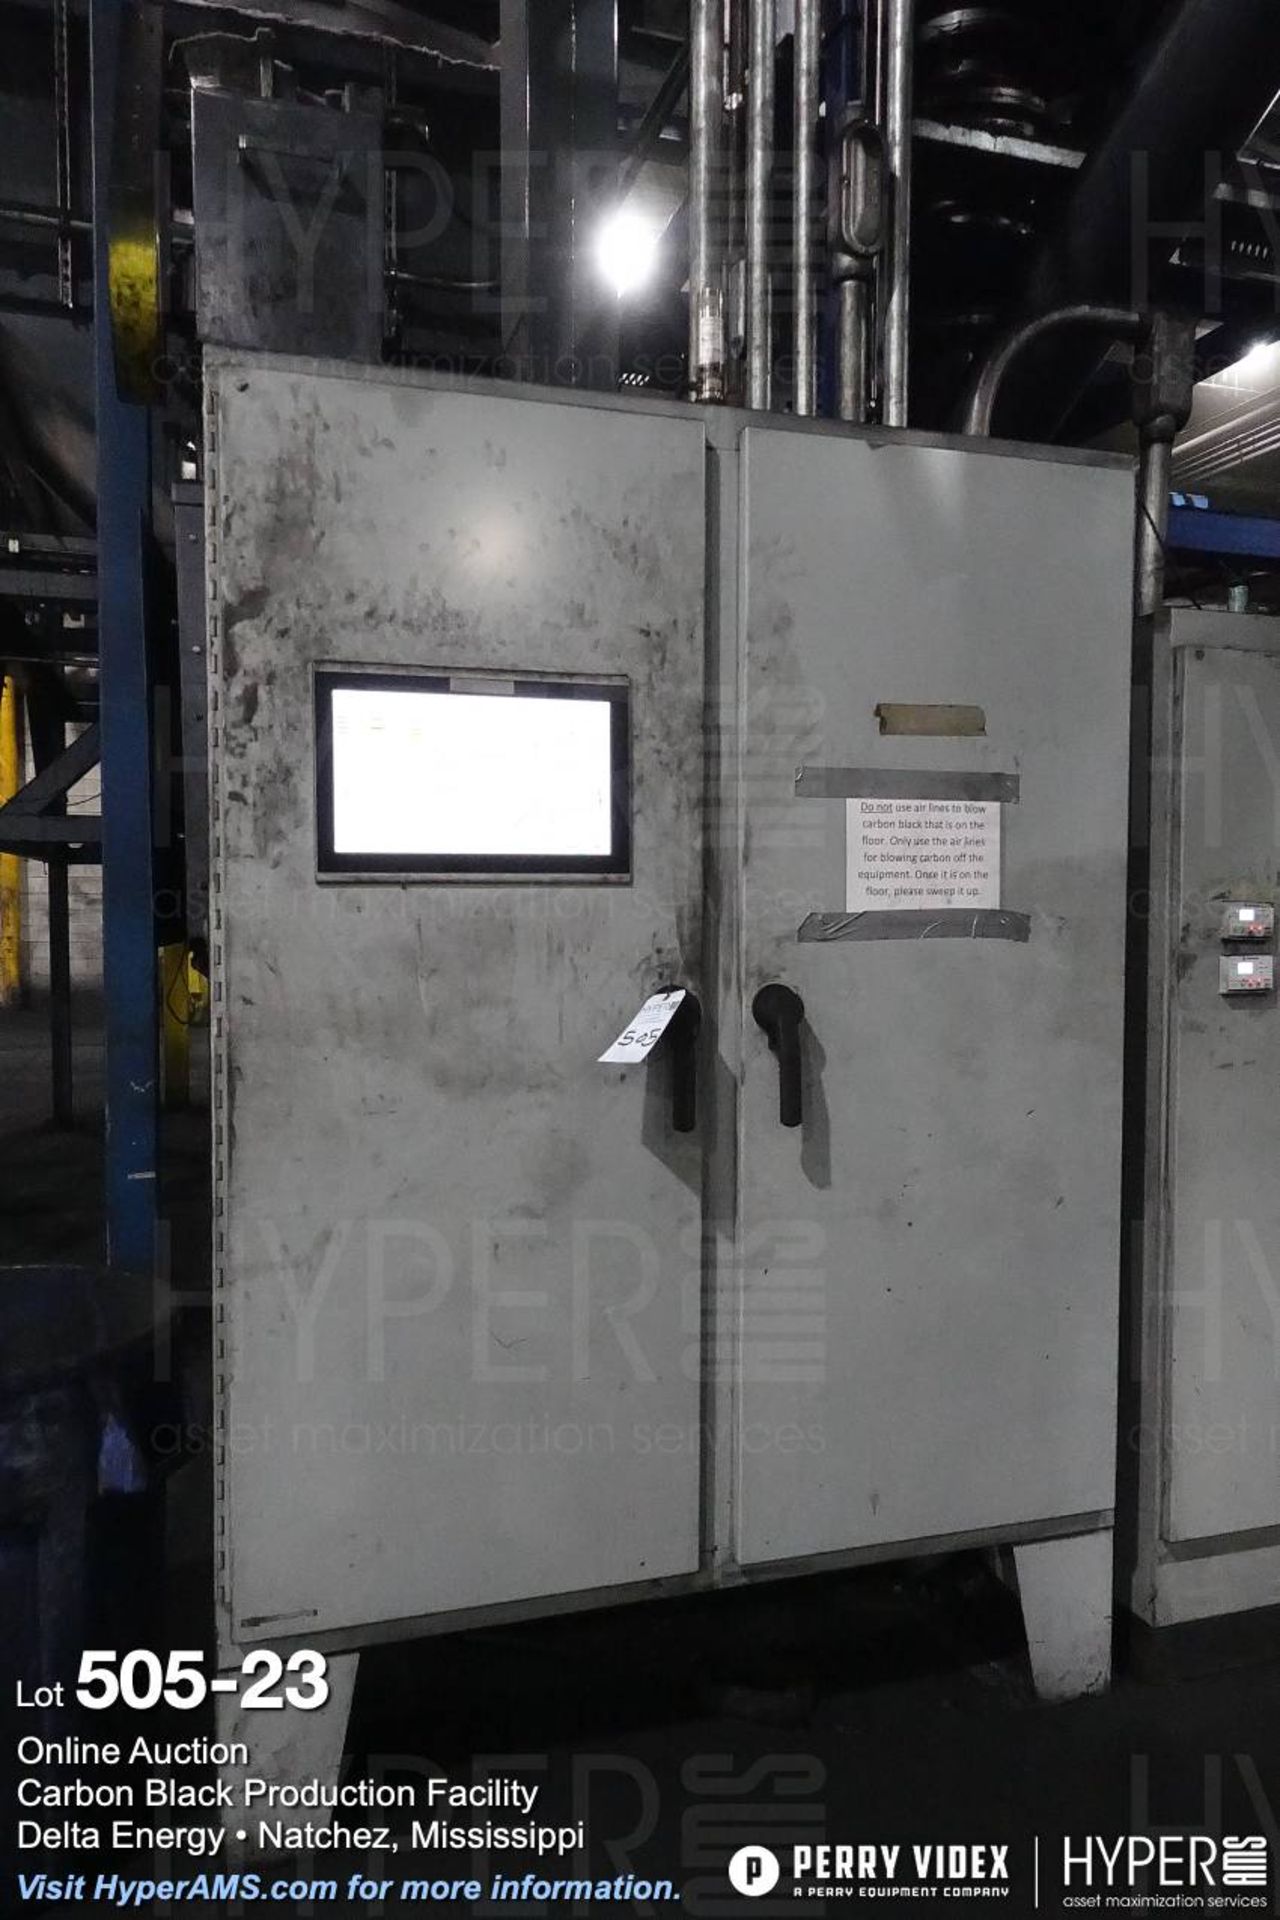 25 Ton/day continuous tire pyrolysis reactor - Image 23 of 28